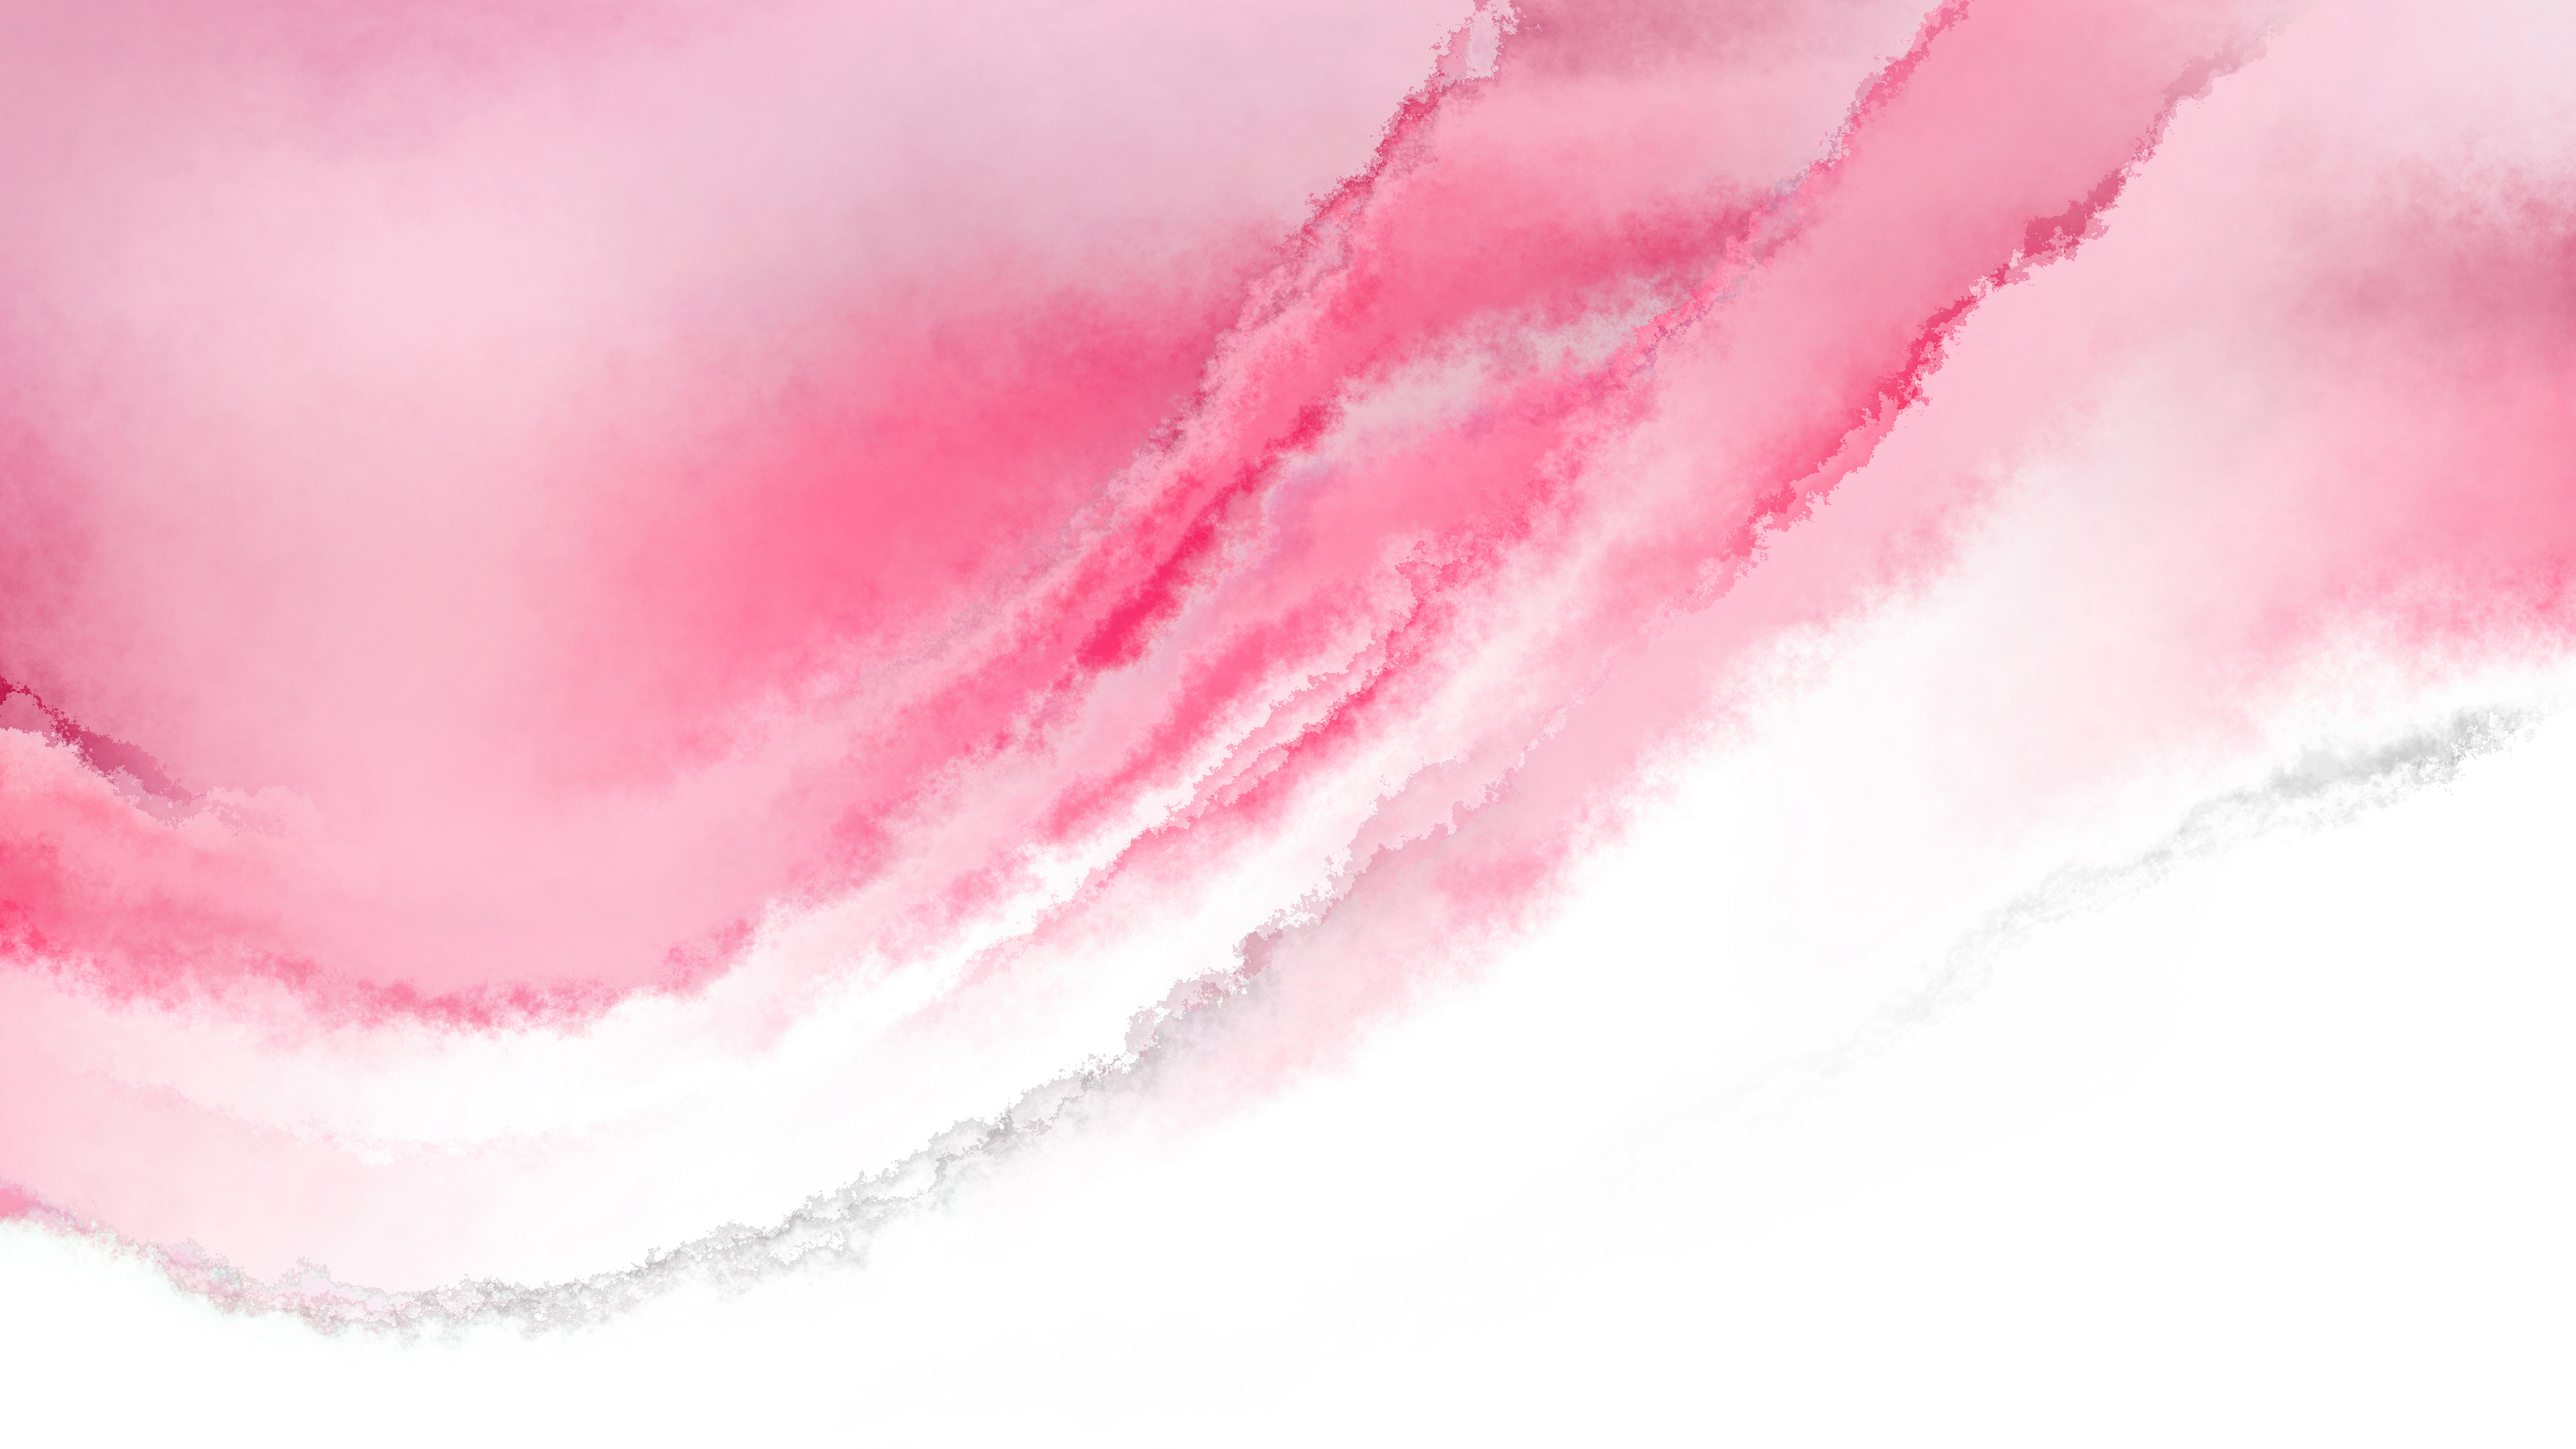 Free Pink and White Watercolor Background Image